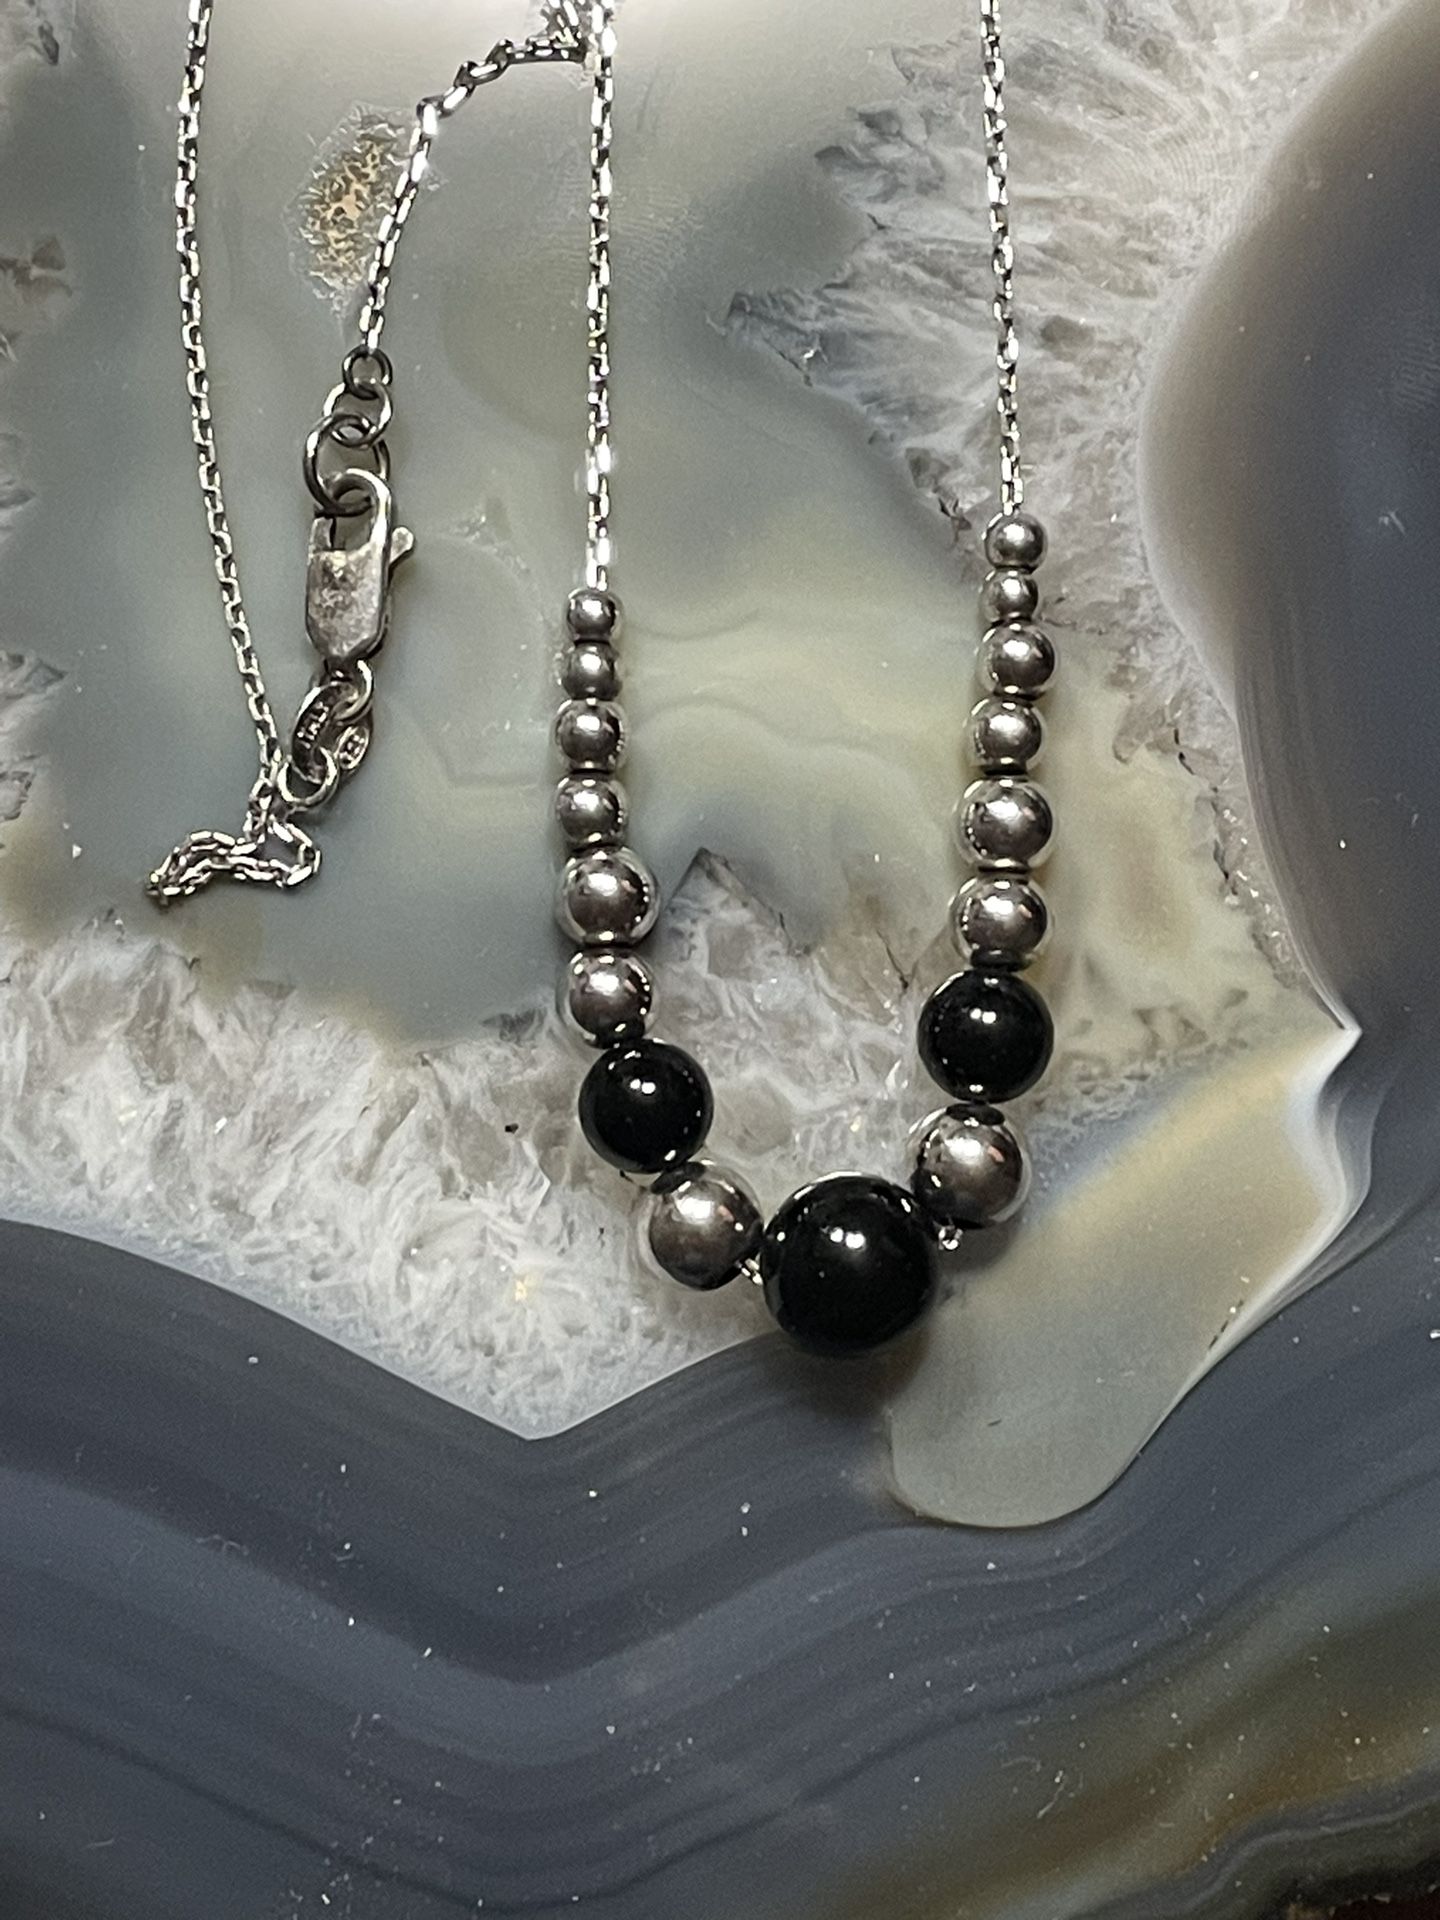 Sterling Silver Beaded Black Necklace 